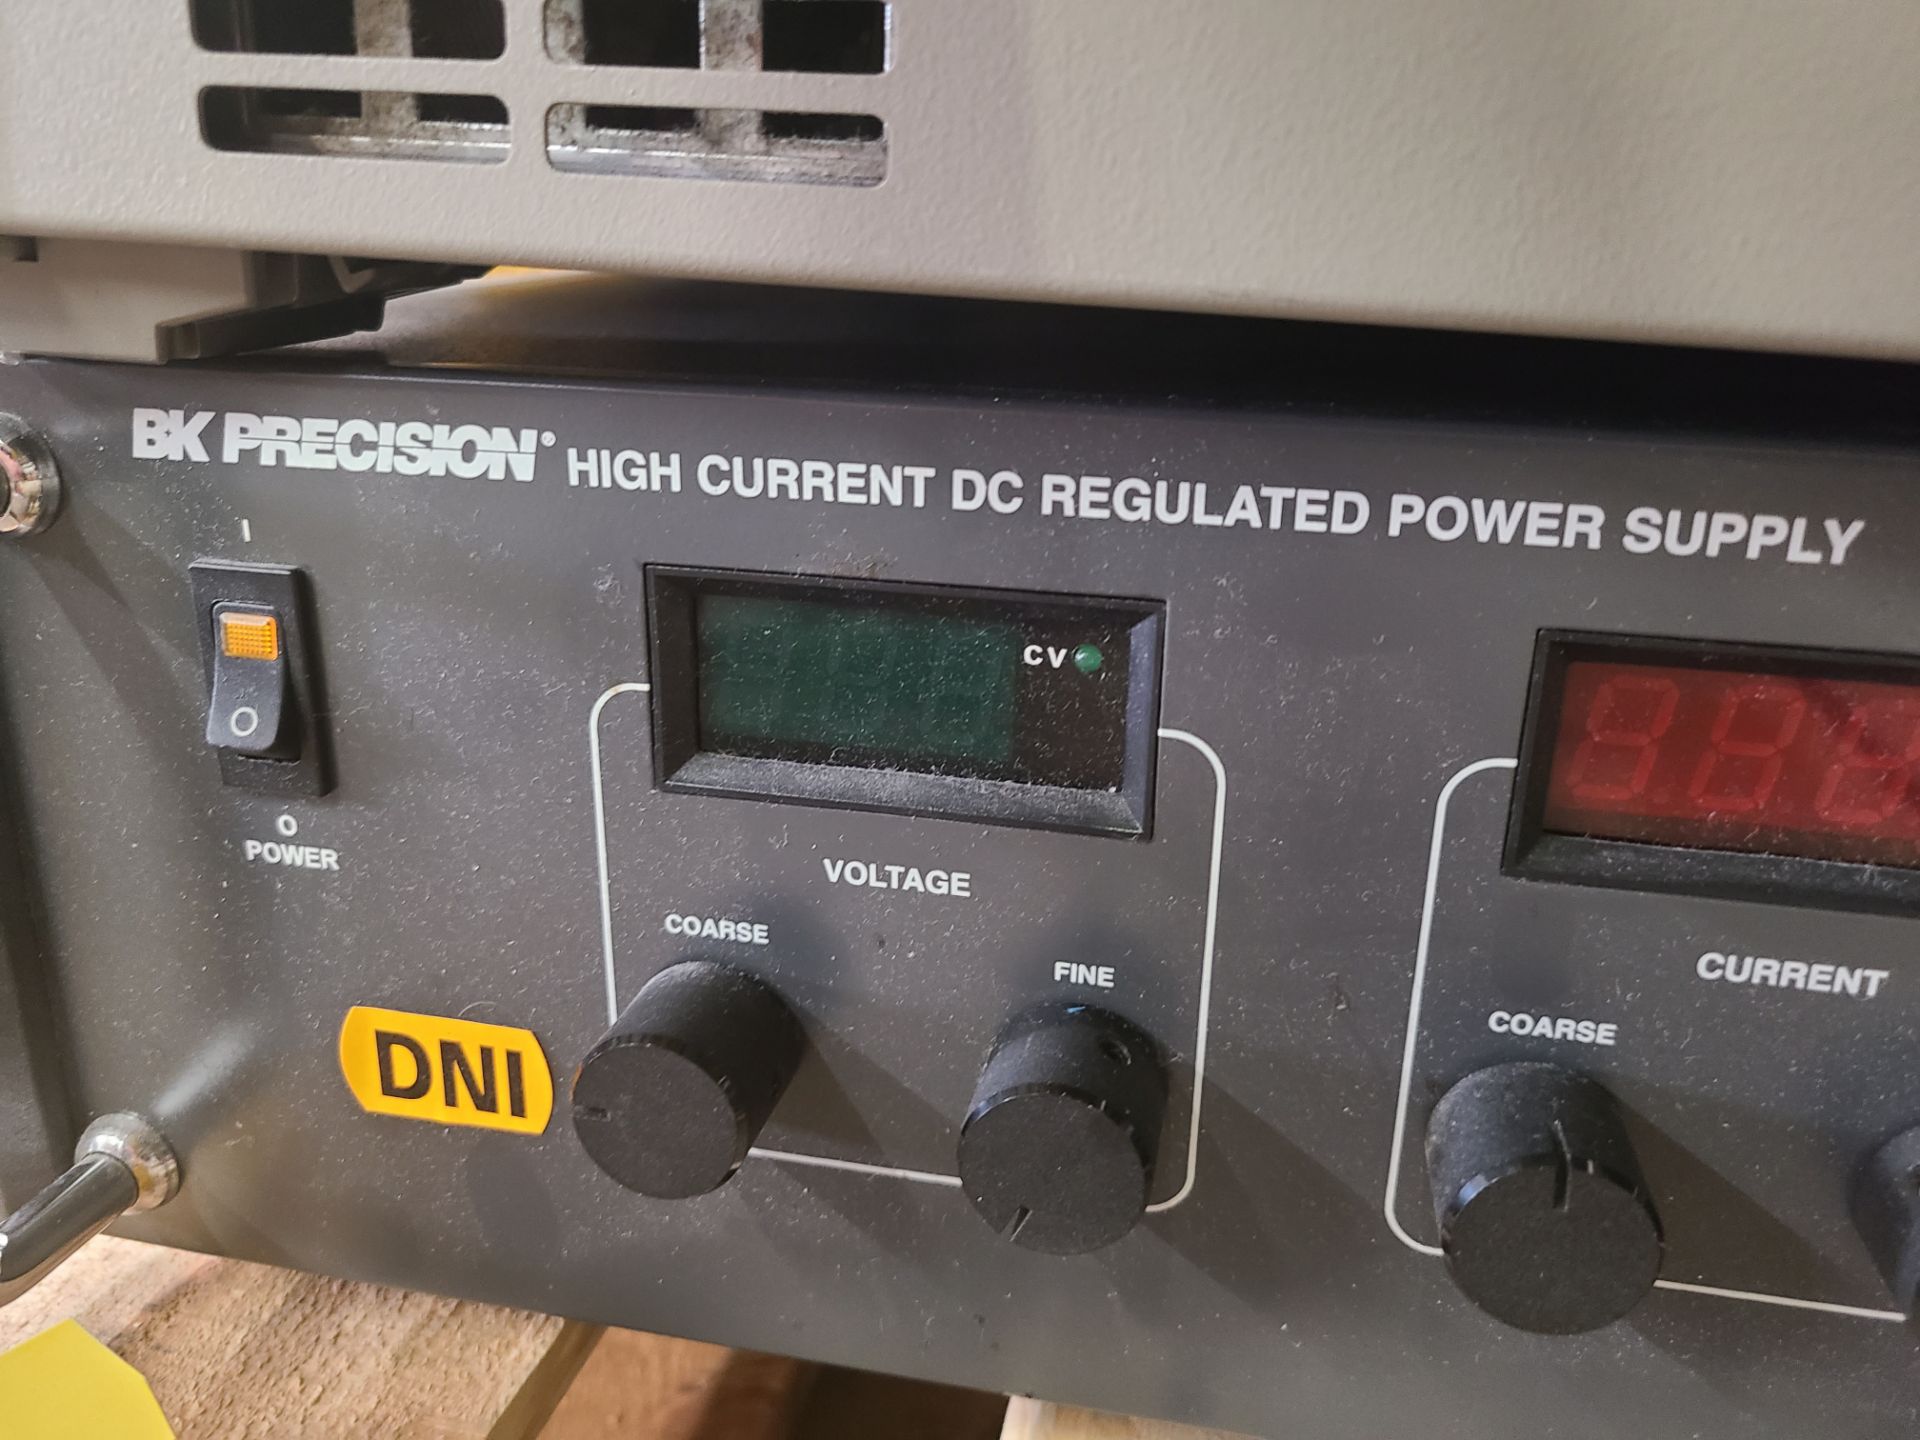 BK PRECISION HIGH CURRENT DC POWER SUPPLY - Image 2 of 2